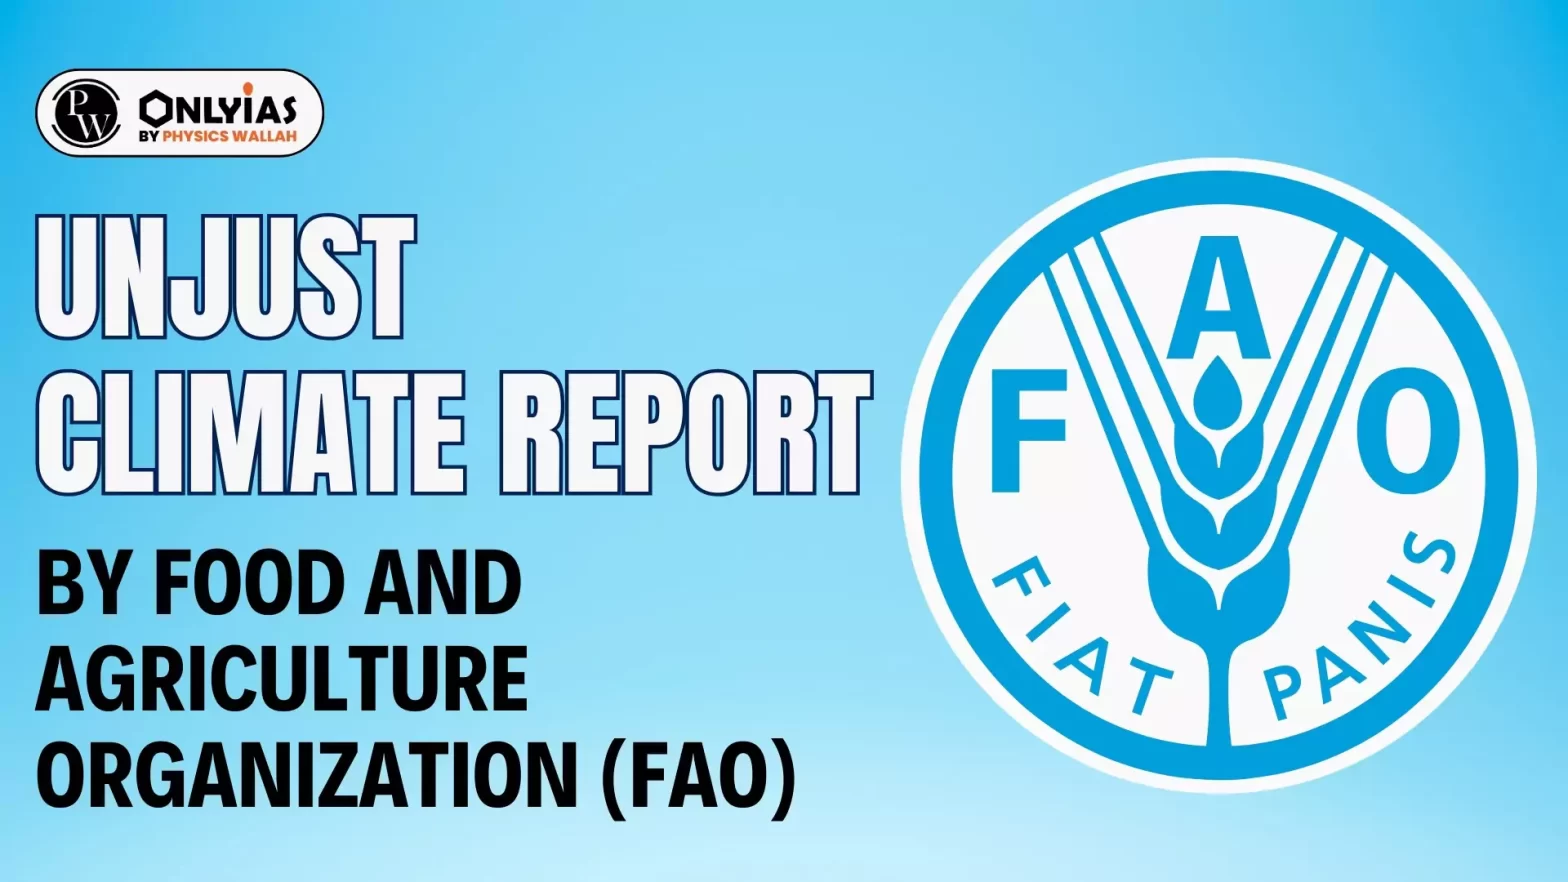 Unjust Climate Report: By Food and Agriculture Organization (FAO)